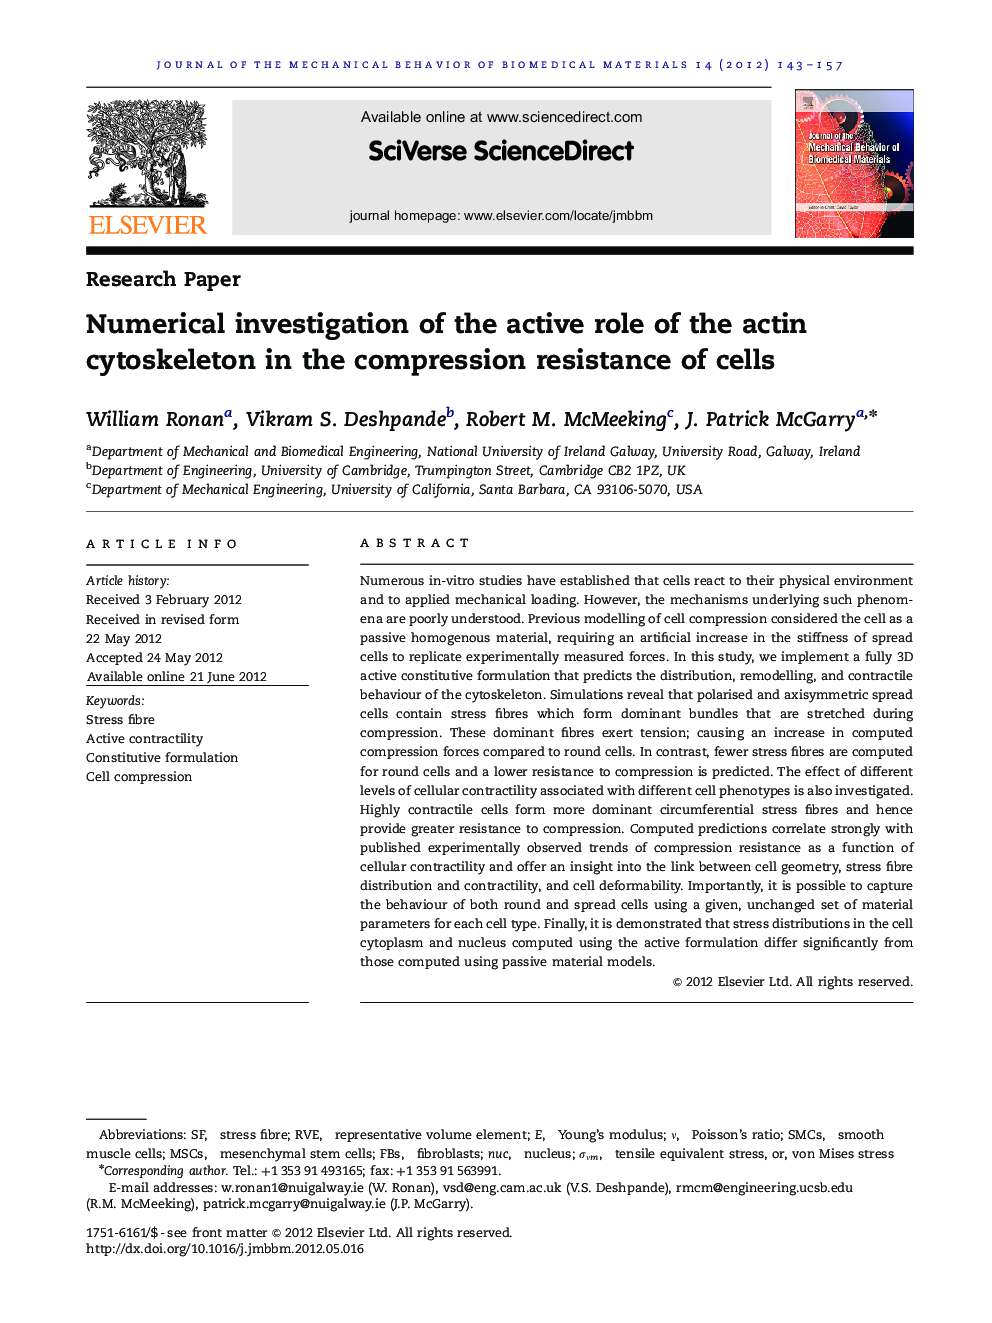 Numerical investigation of the active role of the actin cytoskeleton in the compression resistance of cells